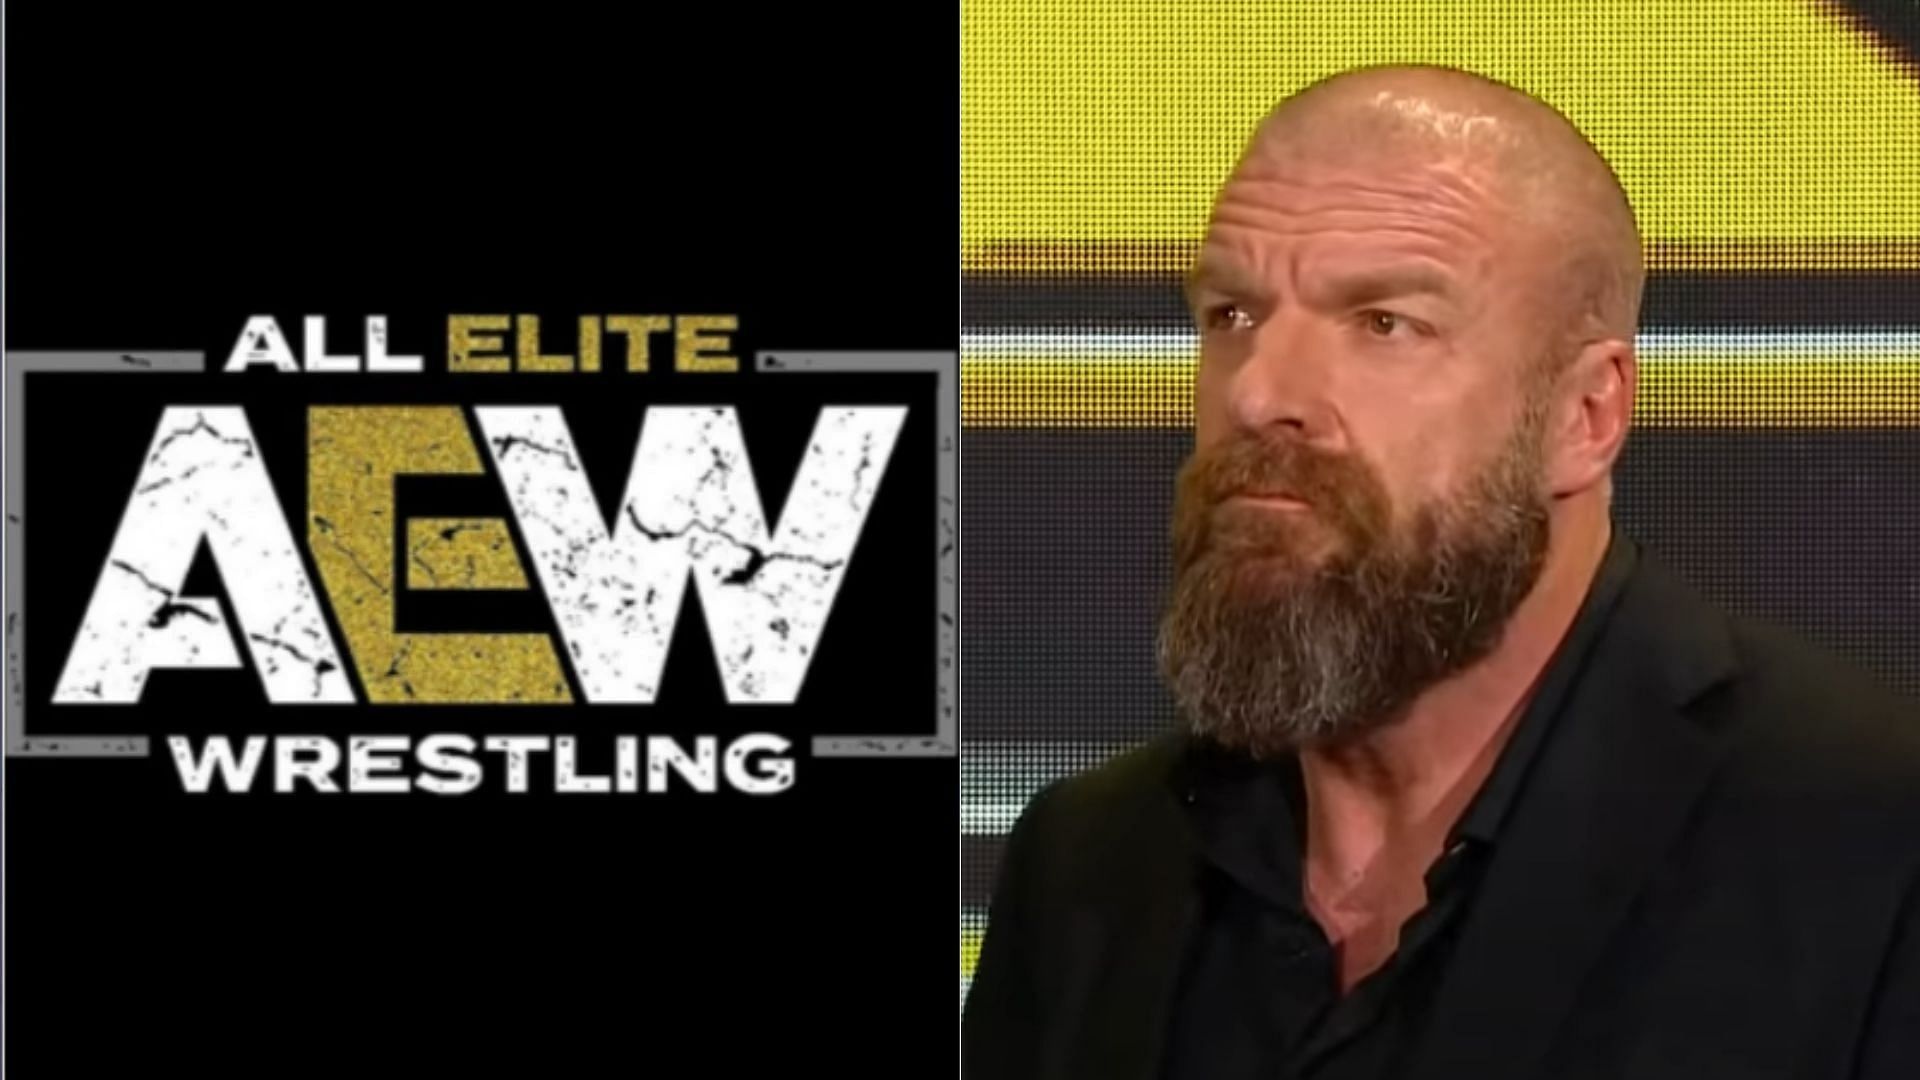 Triple H founded the NXT brand.